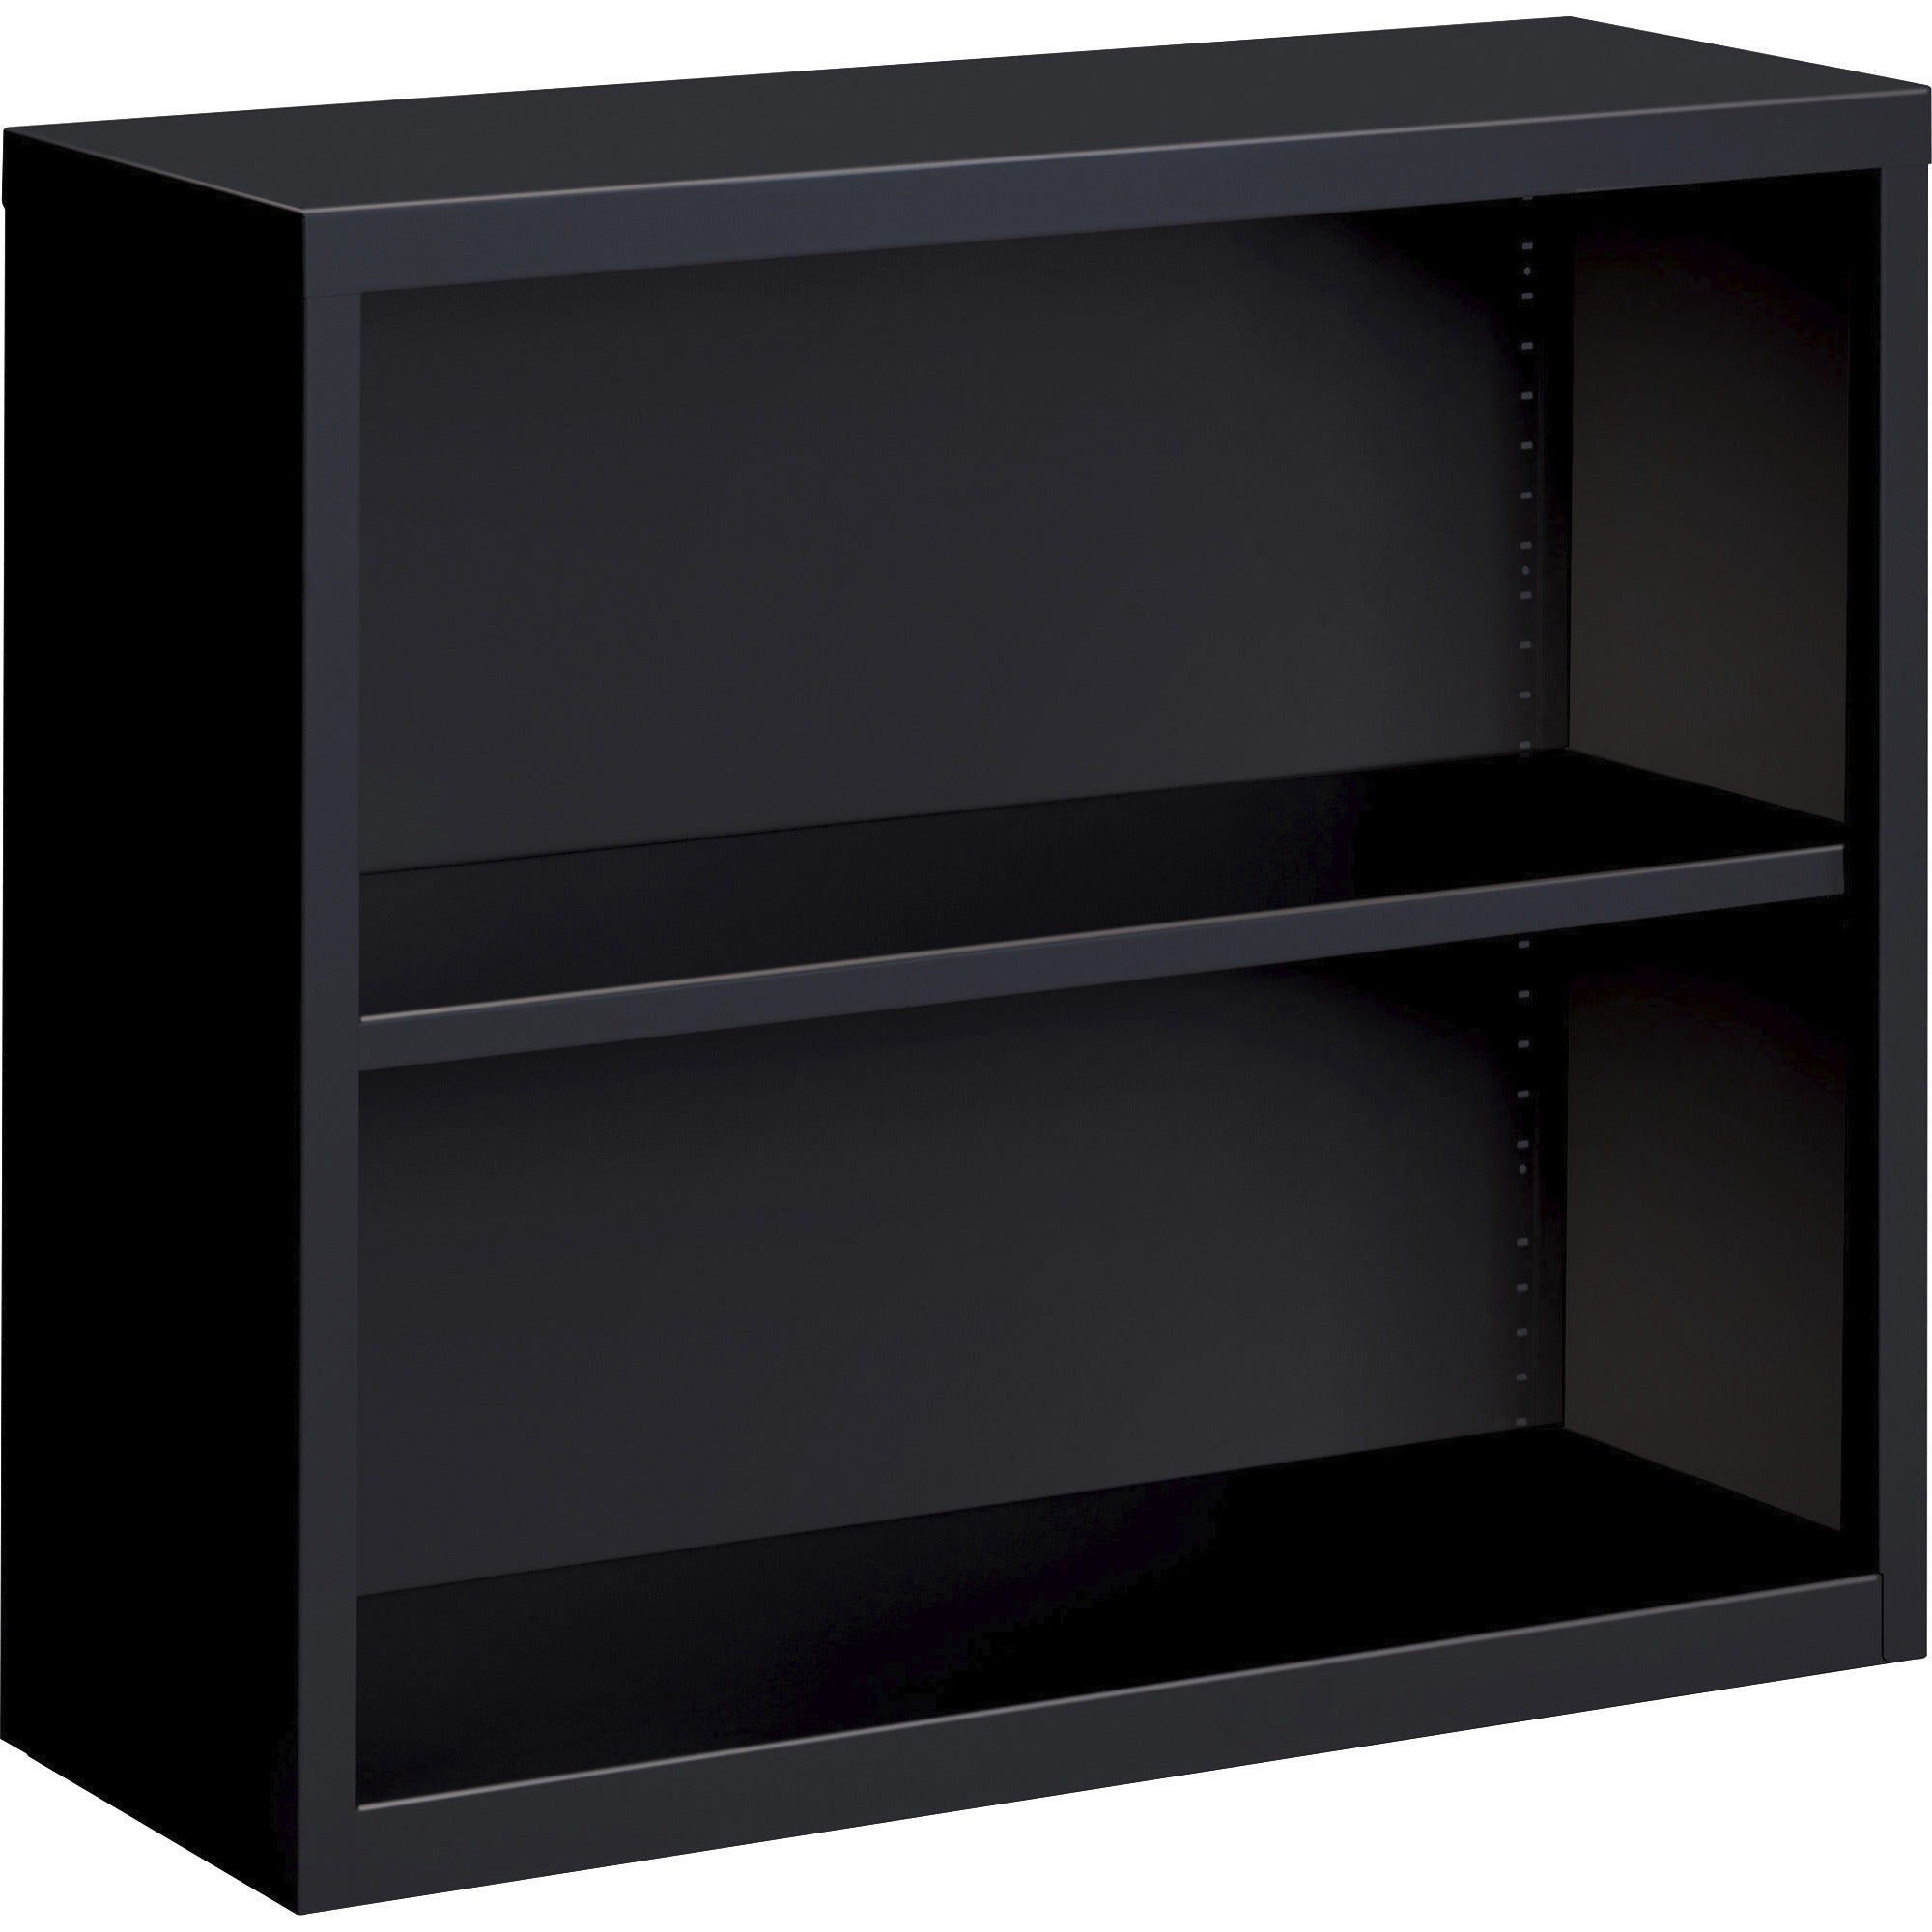 Lorell Fortress Series Bookcase - 34.5" x 13" x 30" - 2 x Shelf(ves) - Black - Powder Coated - Steel - Recycled - 